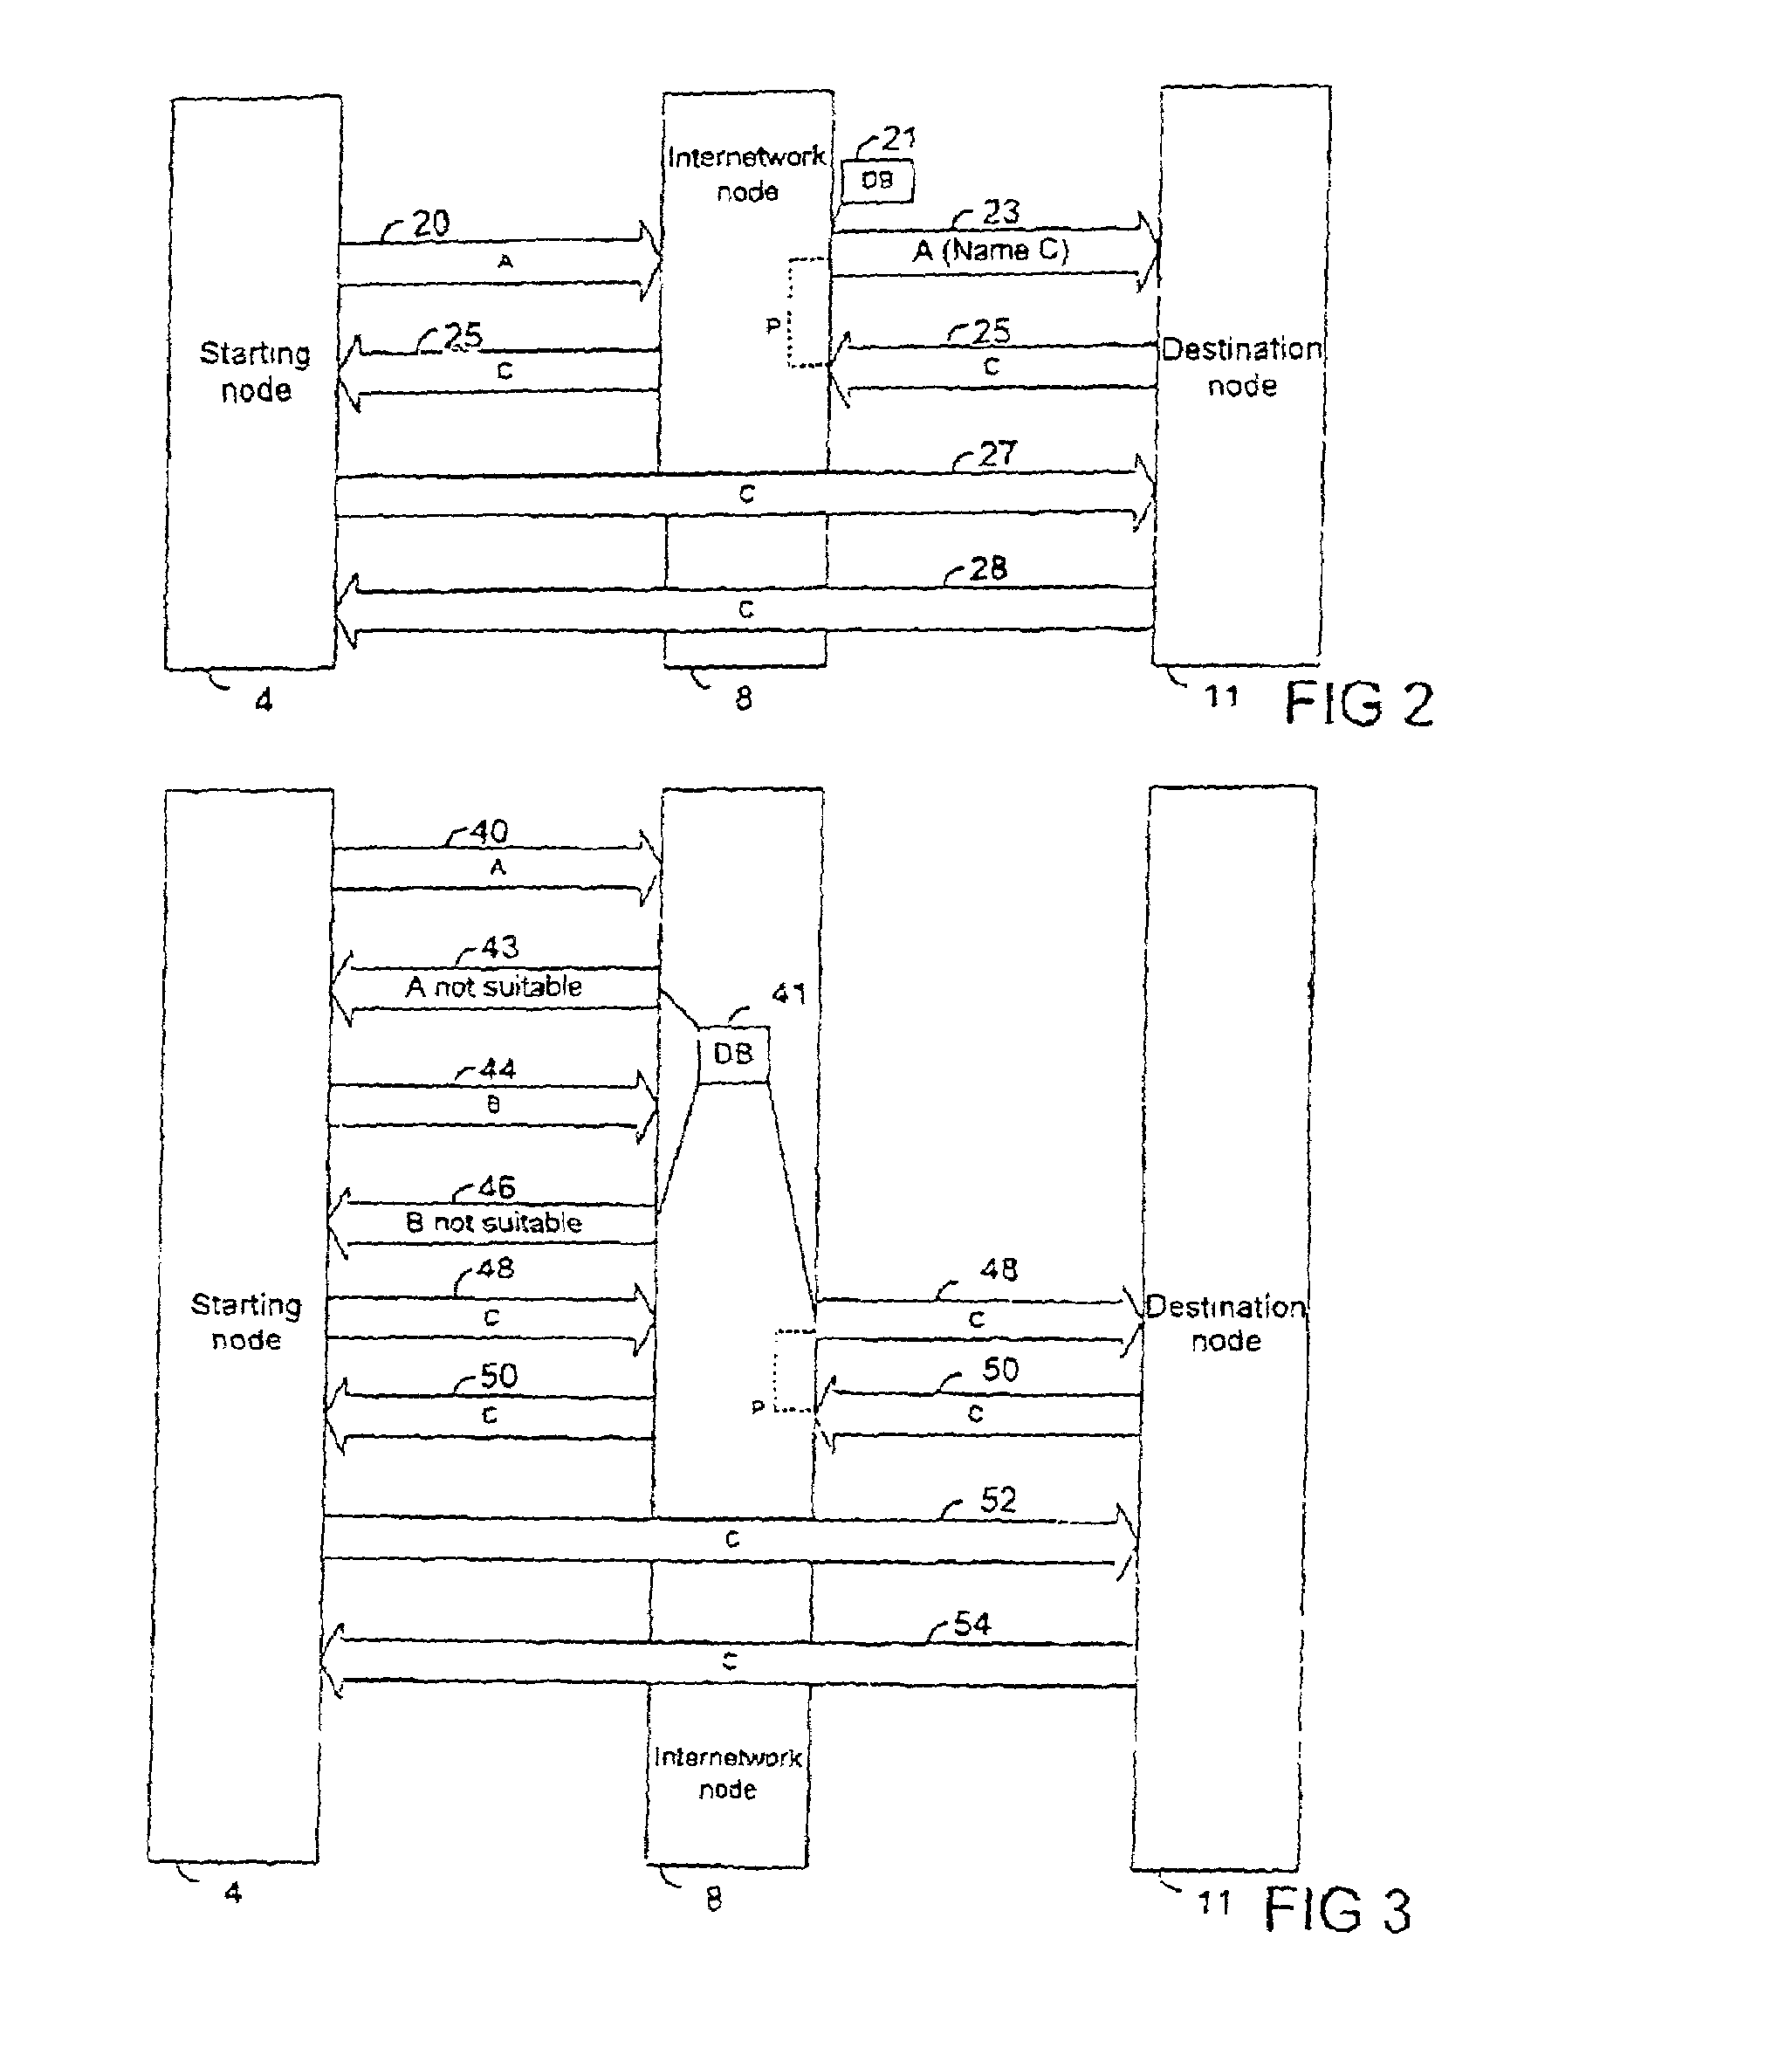 Method of communication between communications networks